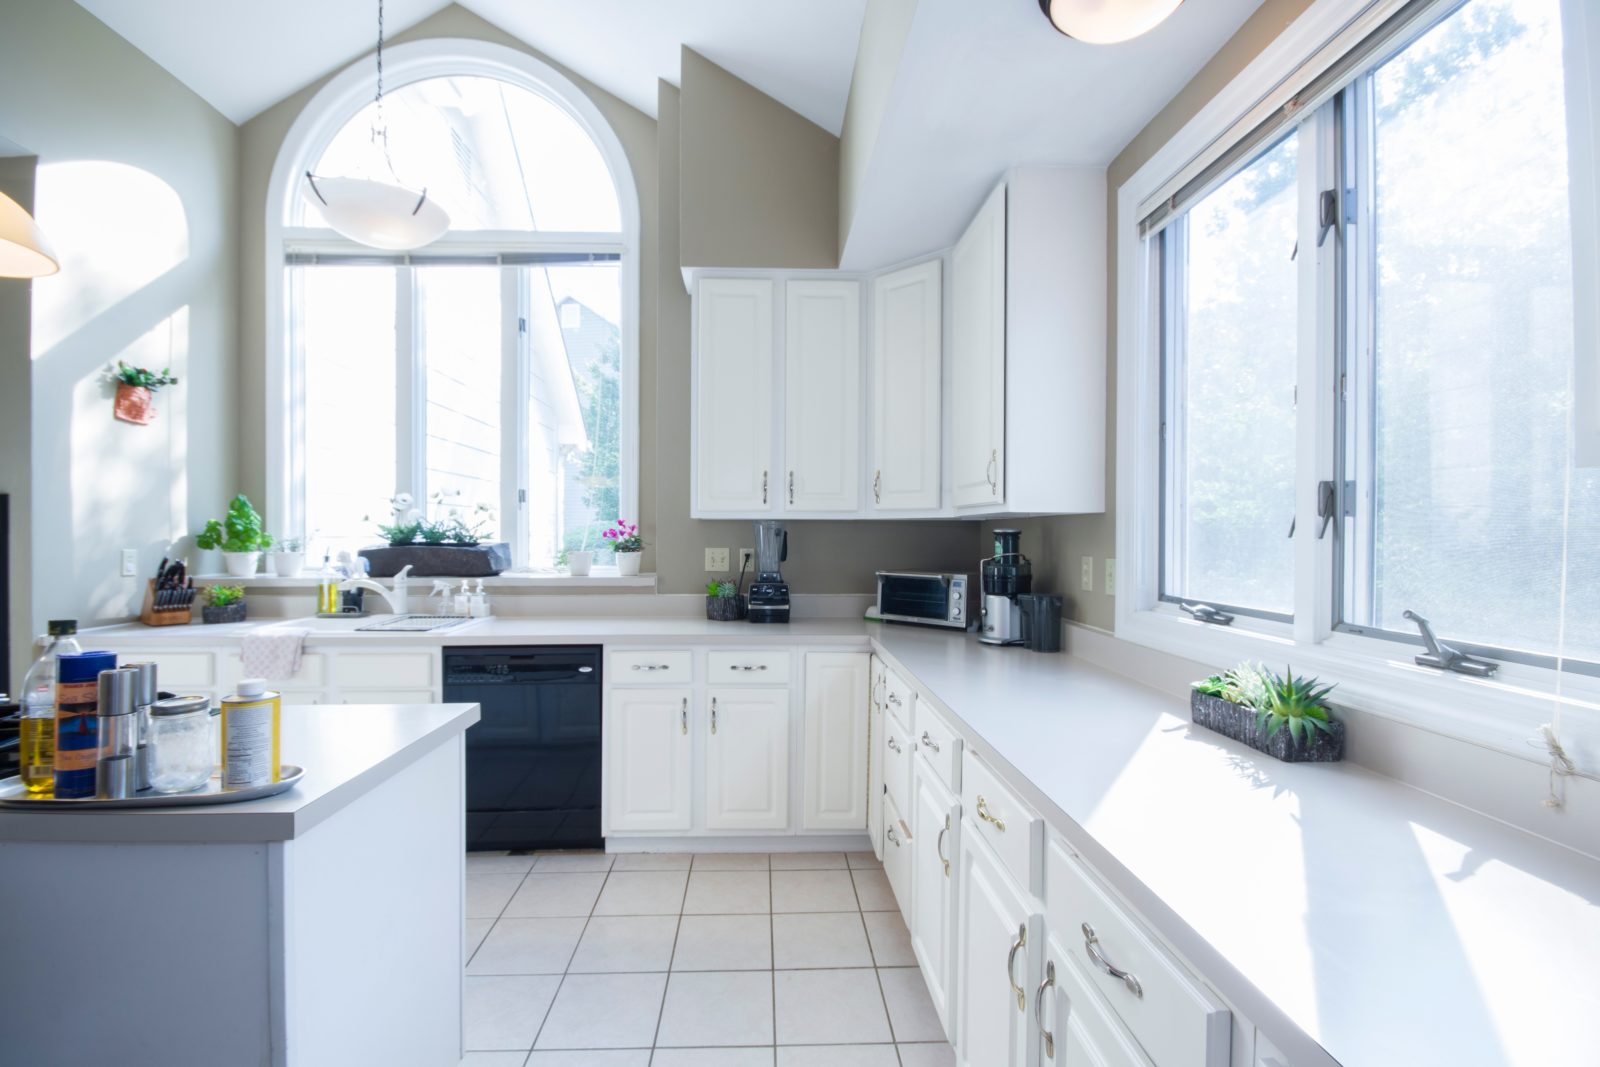 Learn how to make your custom home more energy efficient.